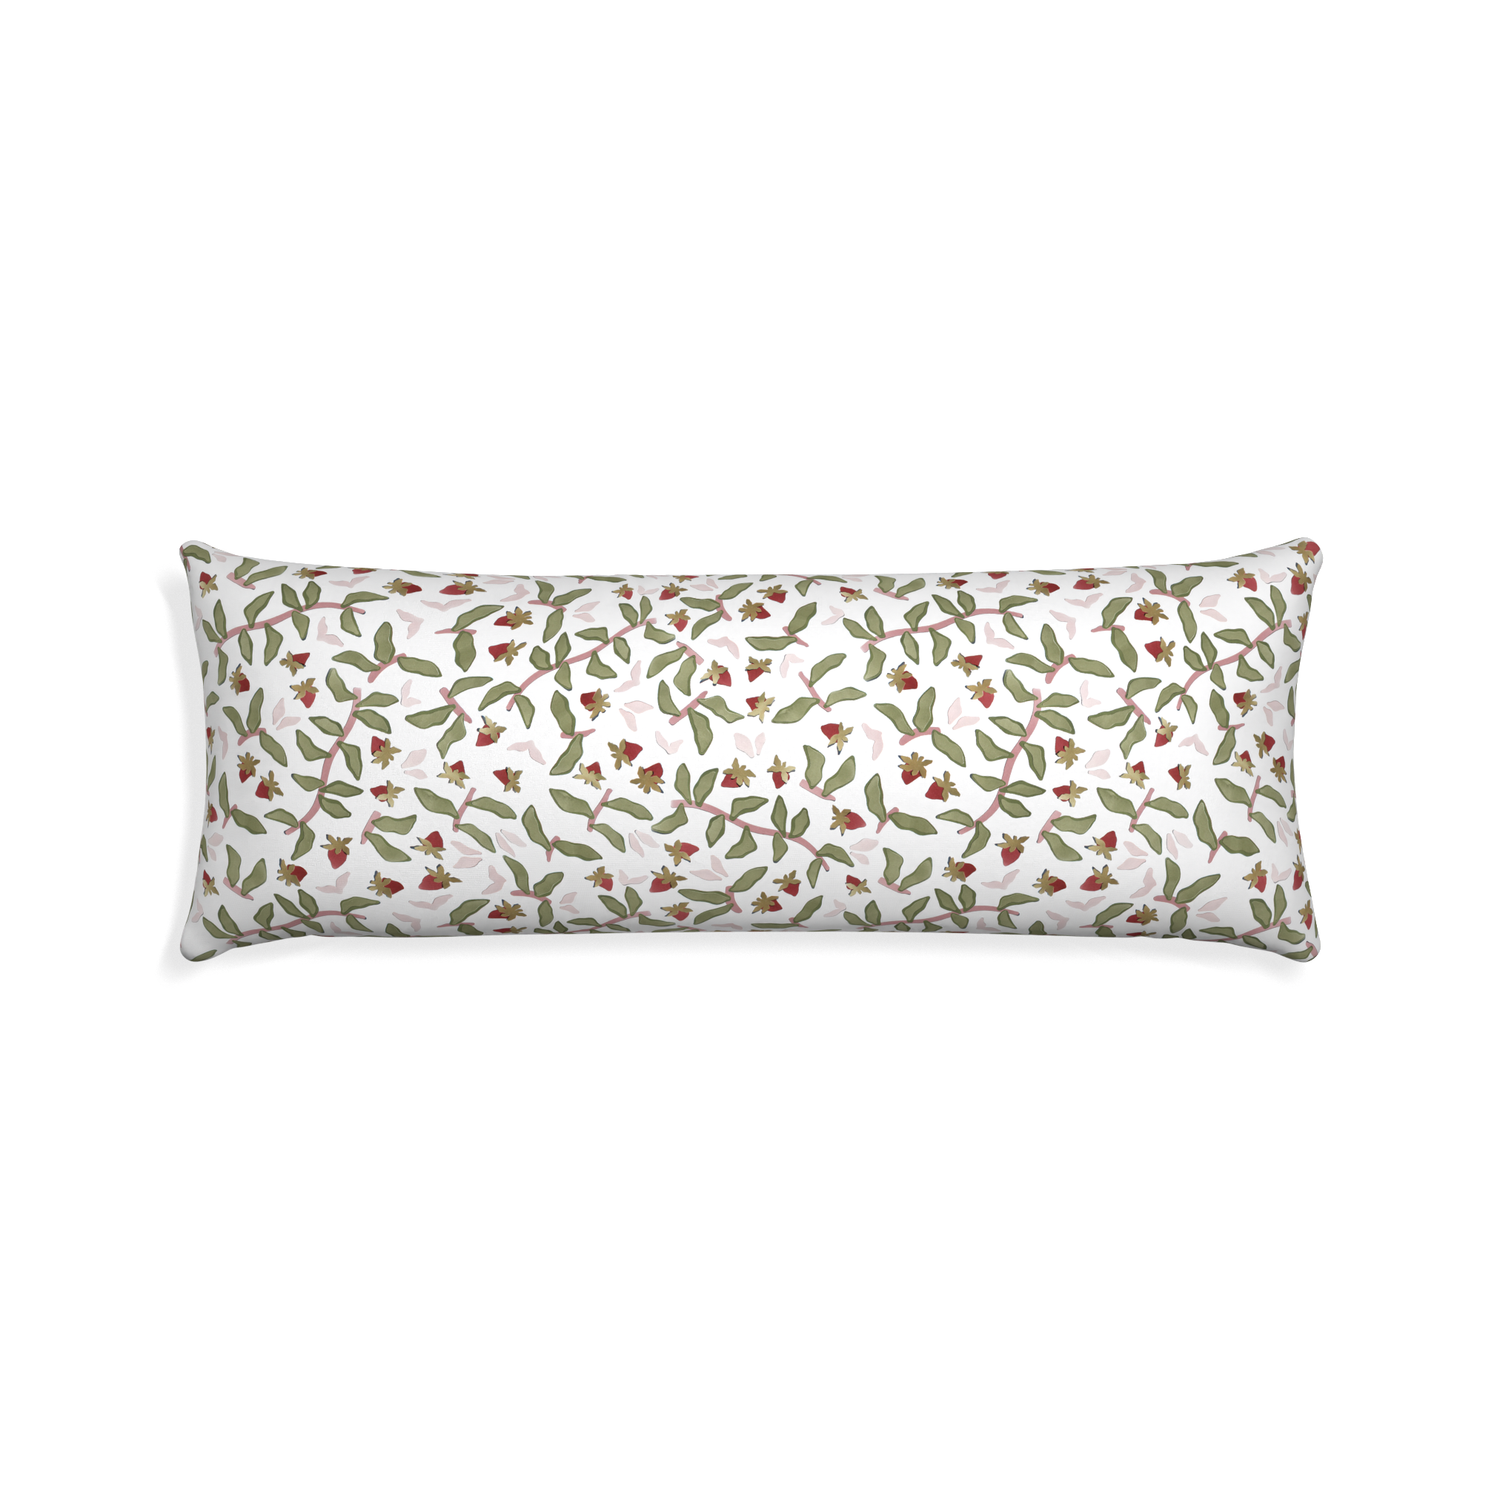 Xl-lumbar nellie custom pillow with none on white background